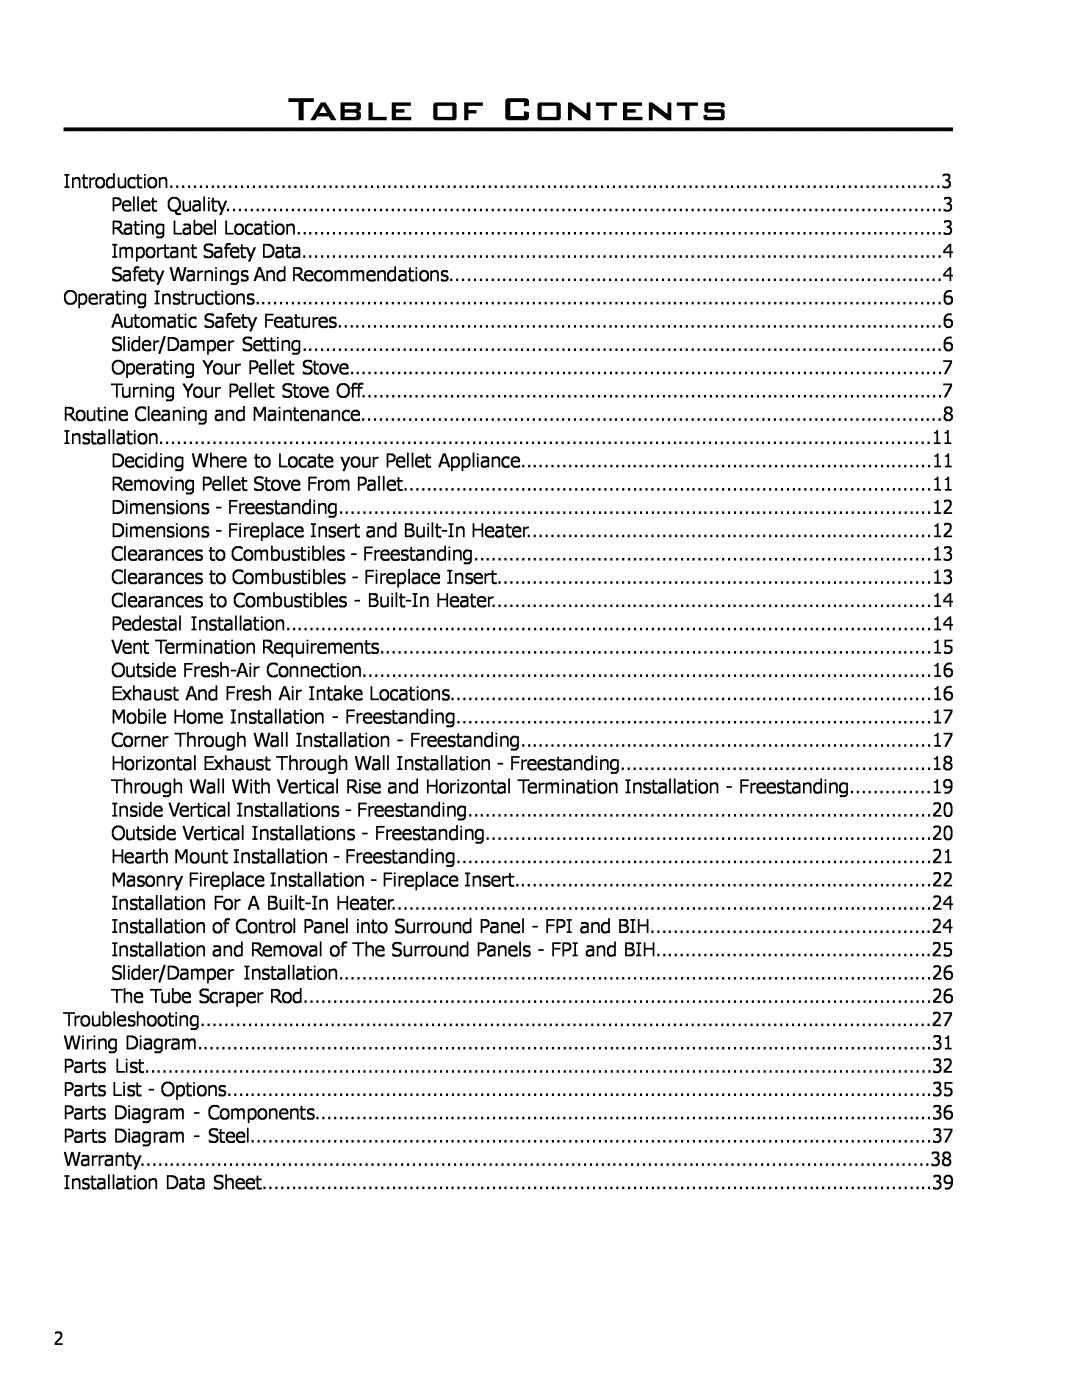 Enviro EF-119 owner manual Table of Contents 